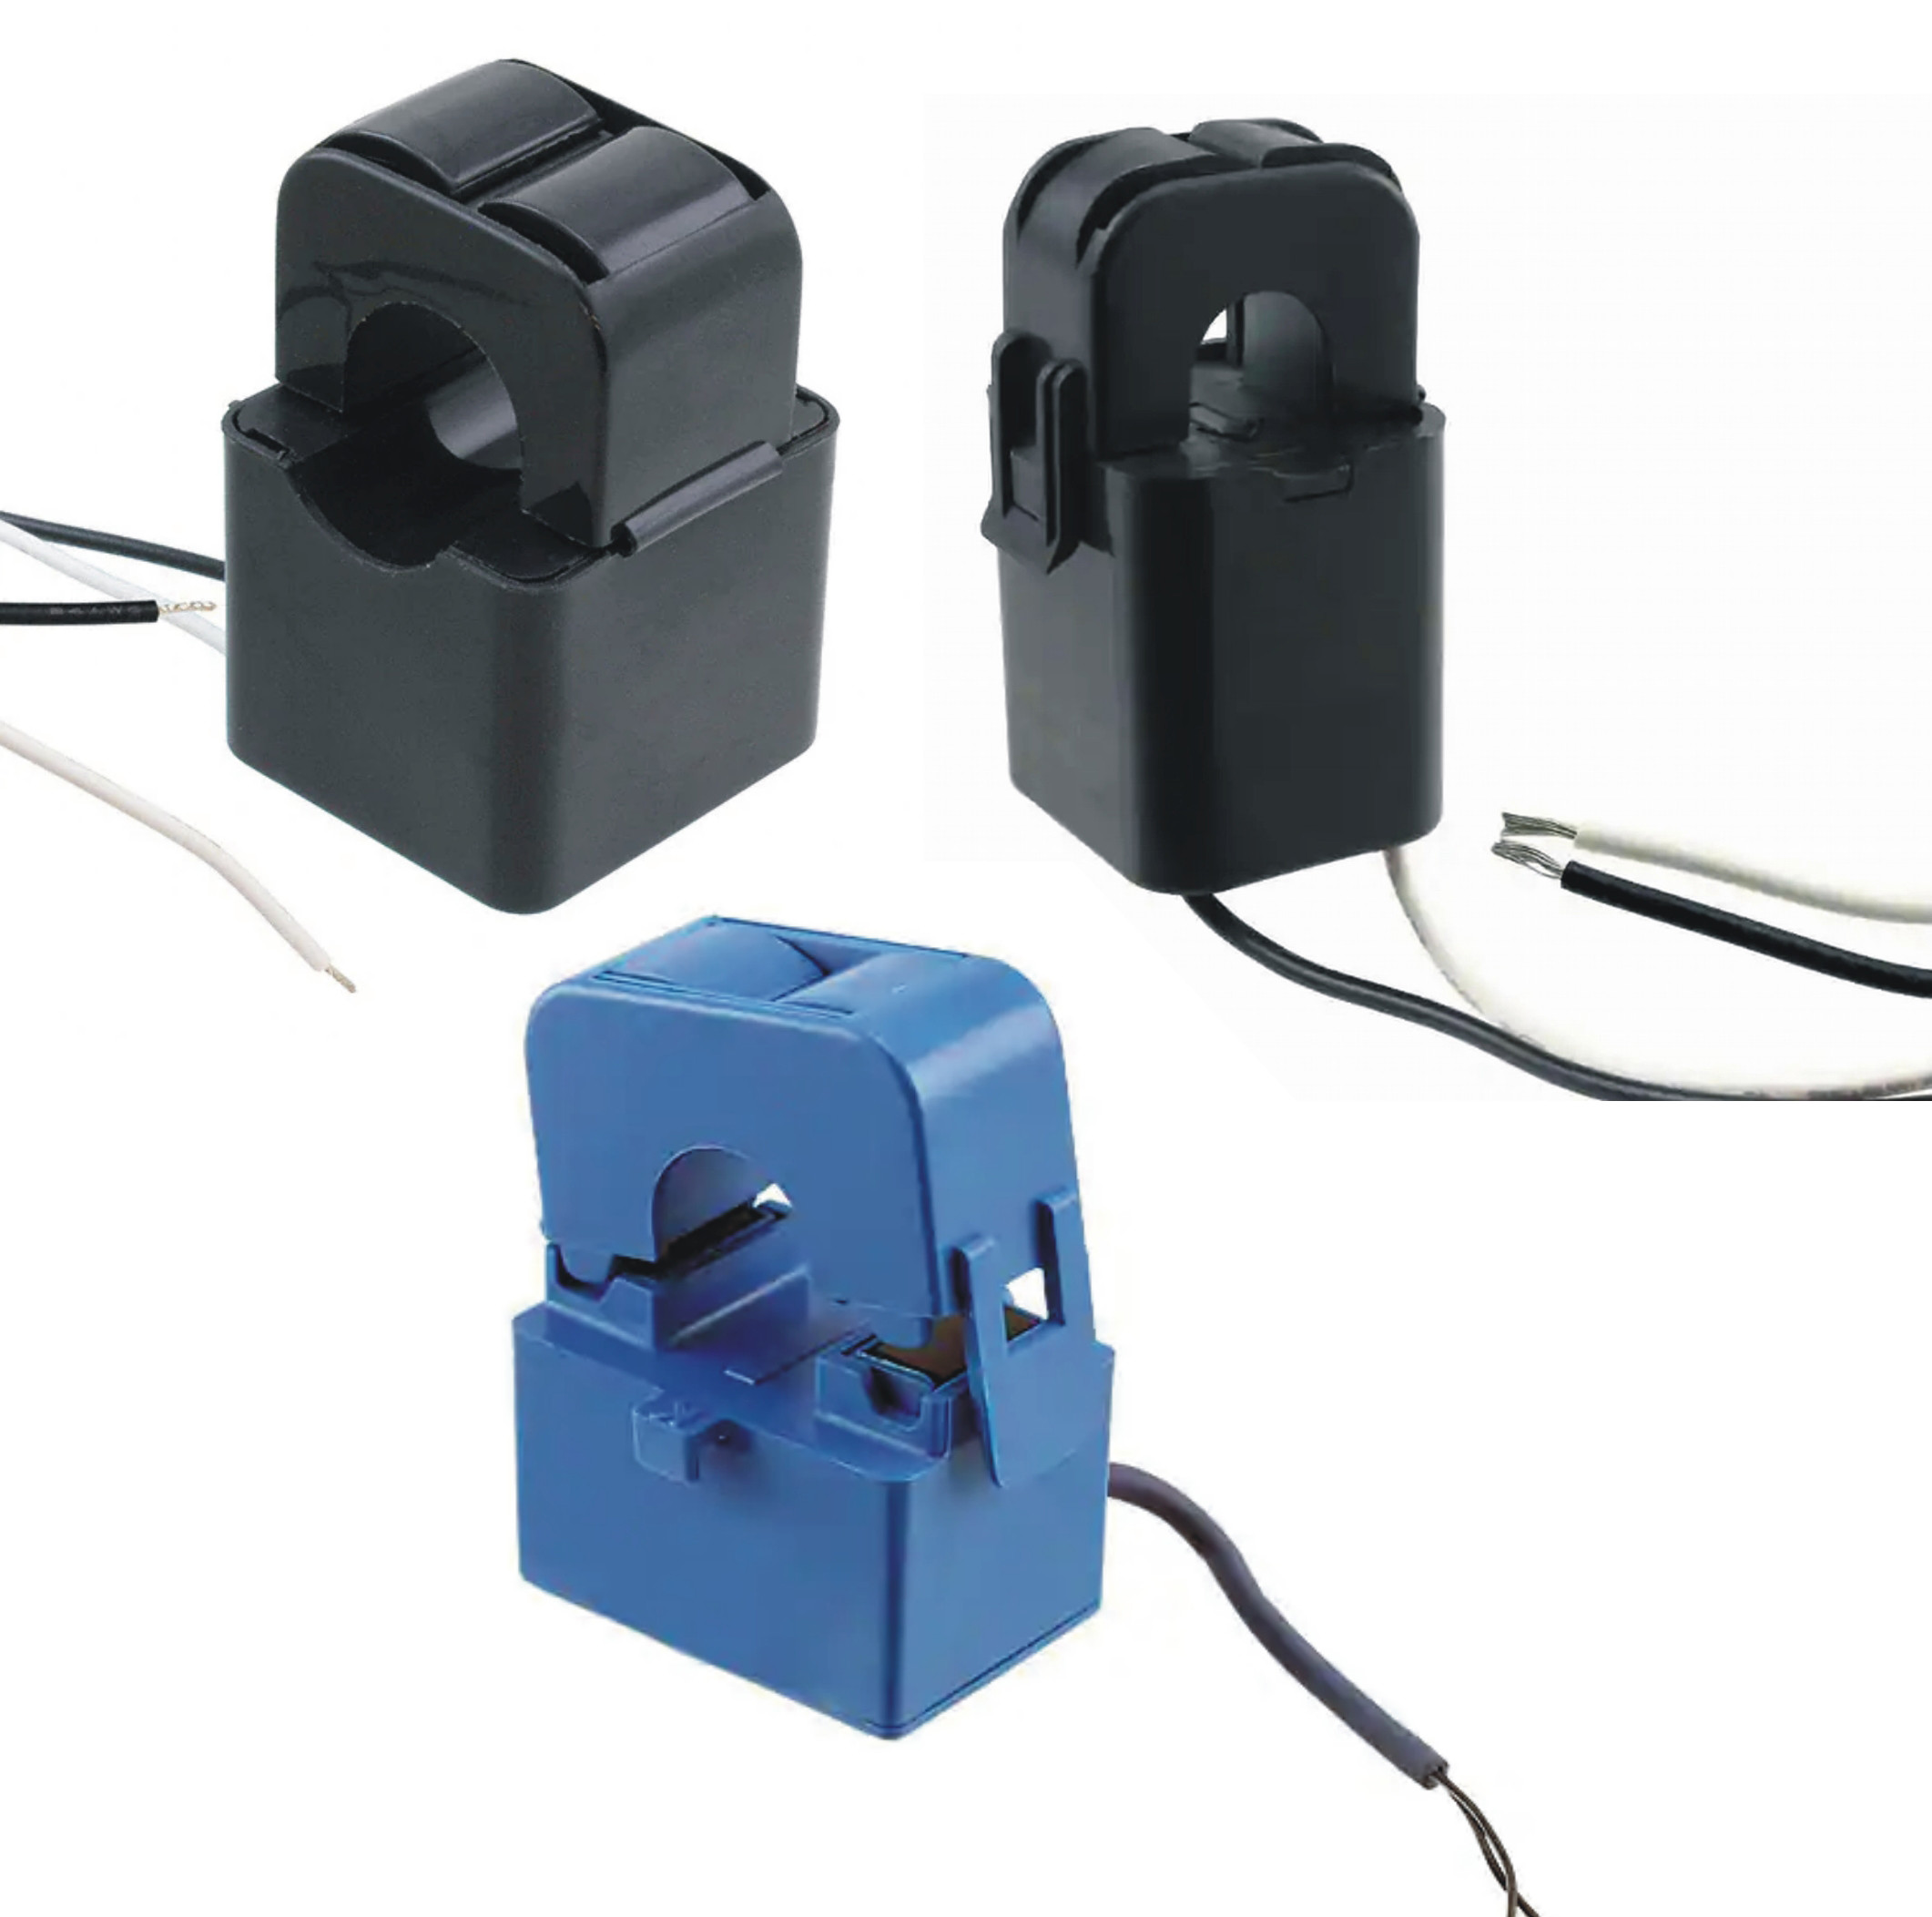 Quality Black Split Core Current Transformer Easy Installation For Control / Load Center for sale